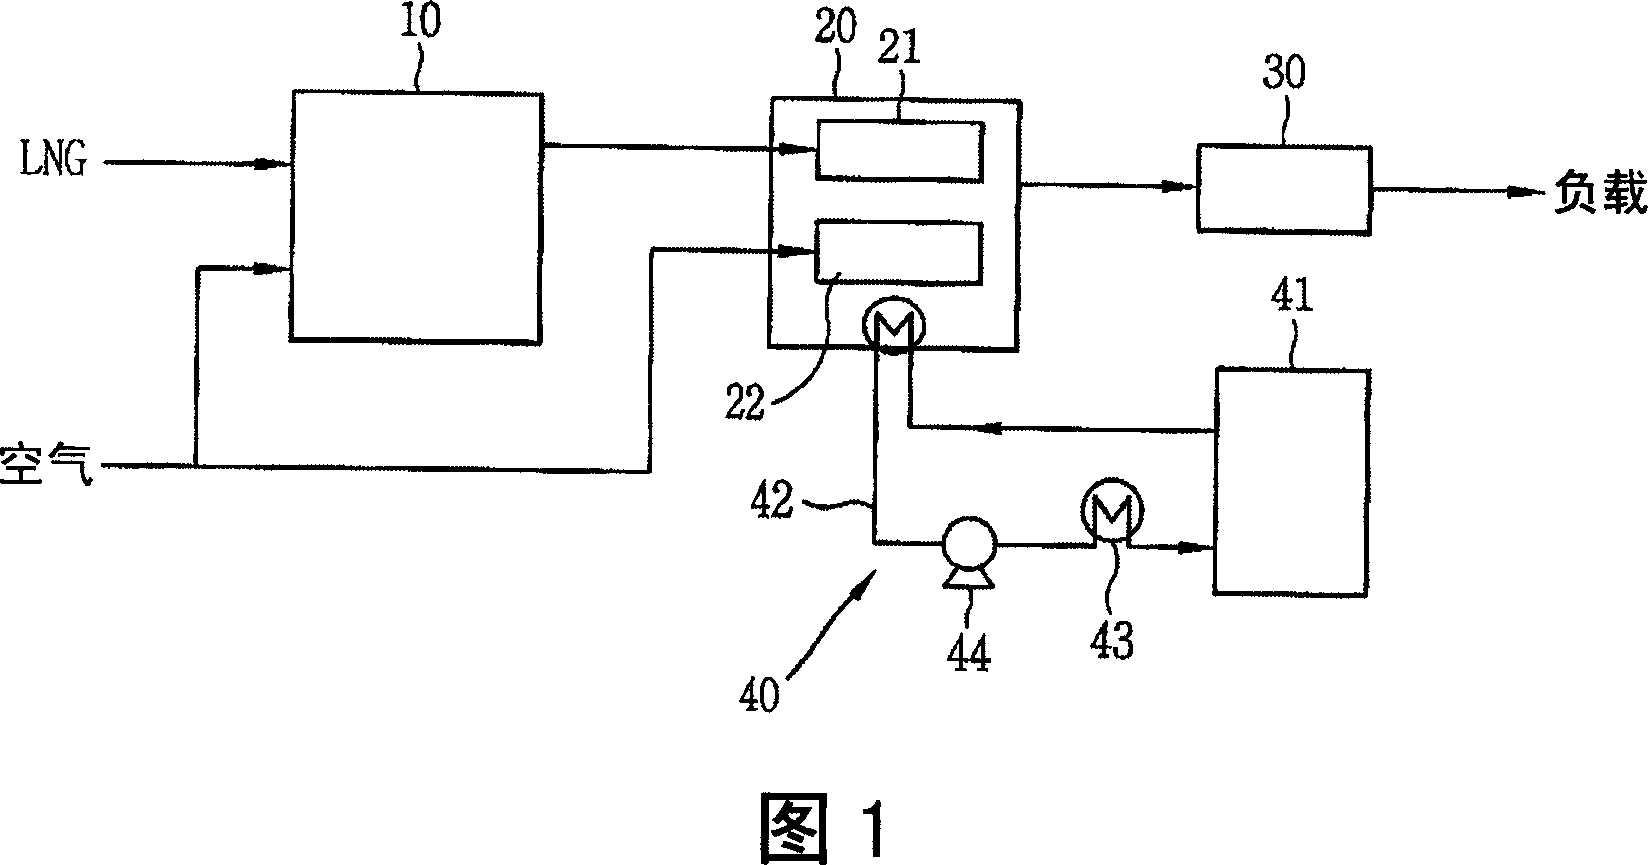 System for preventing freezing of fuel cell